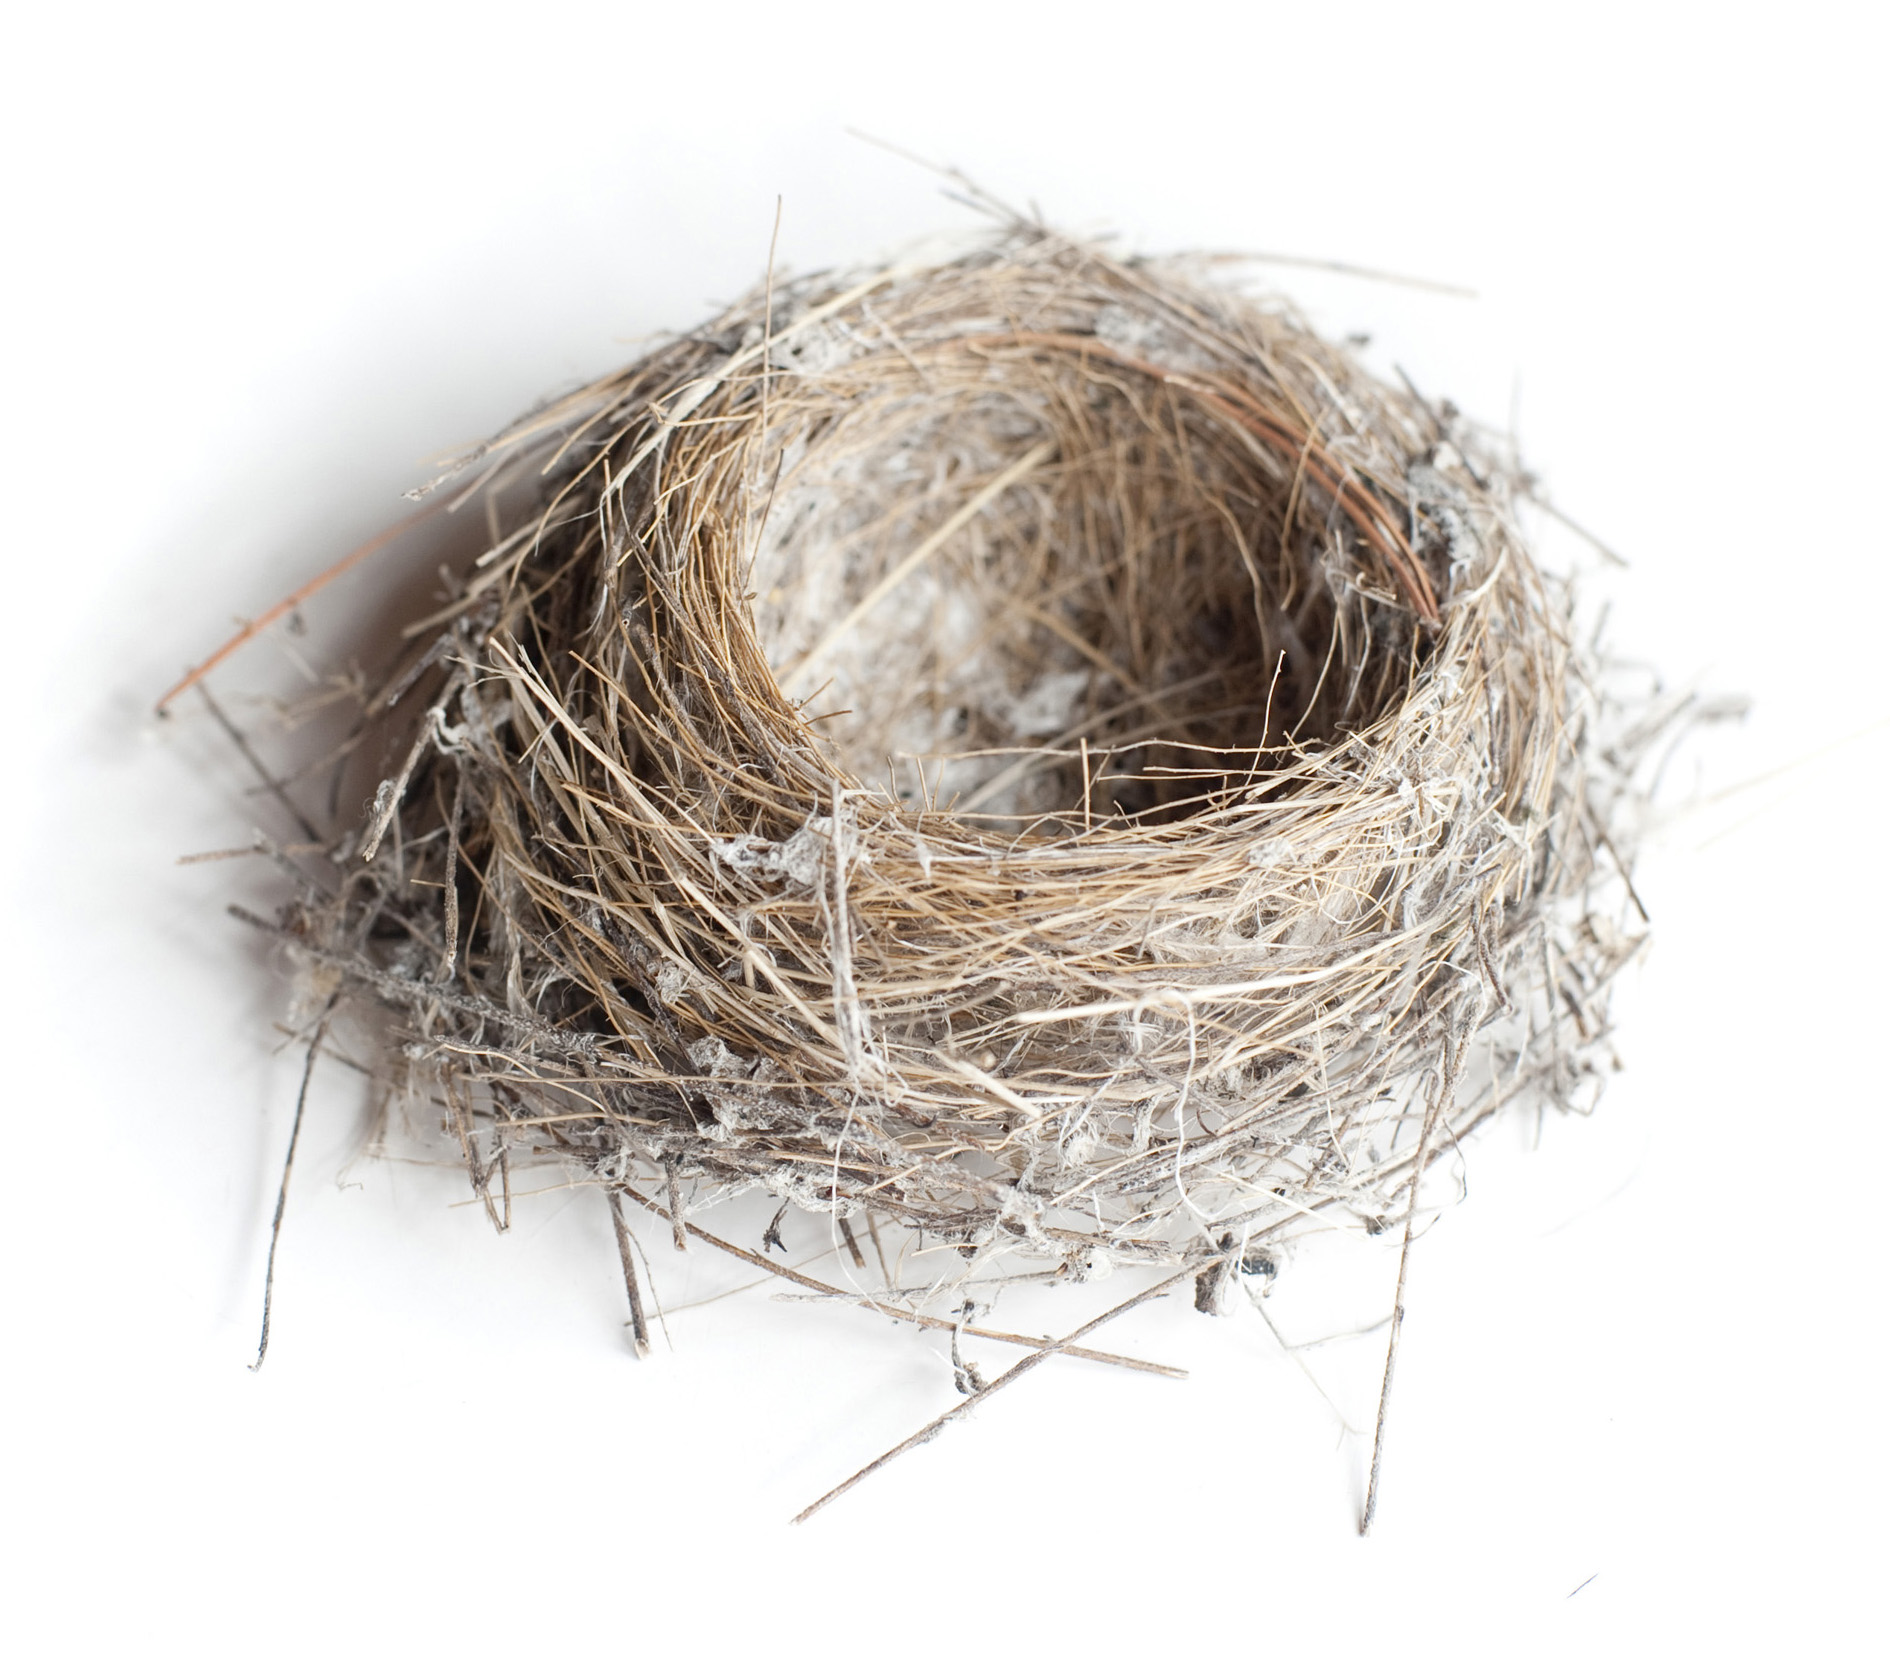 Empty Nest and Hijacking | No